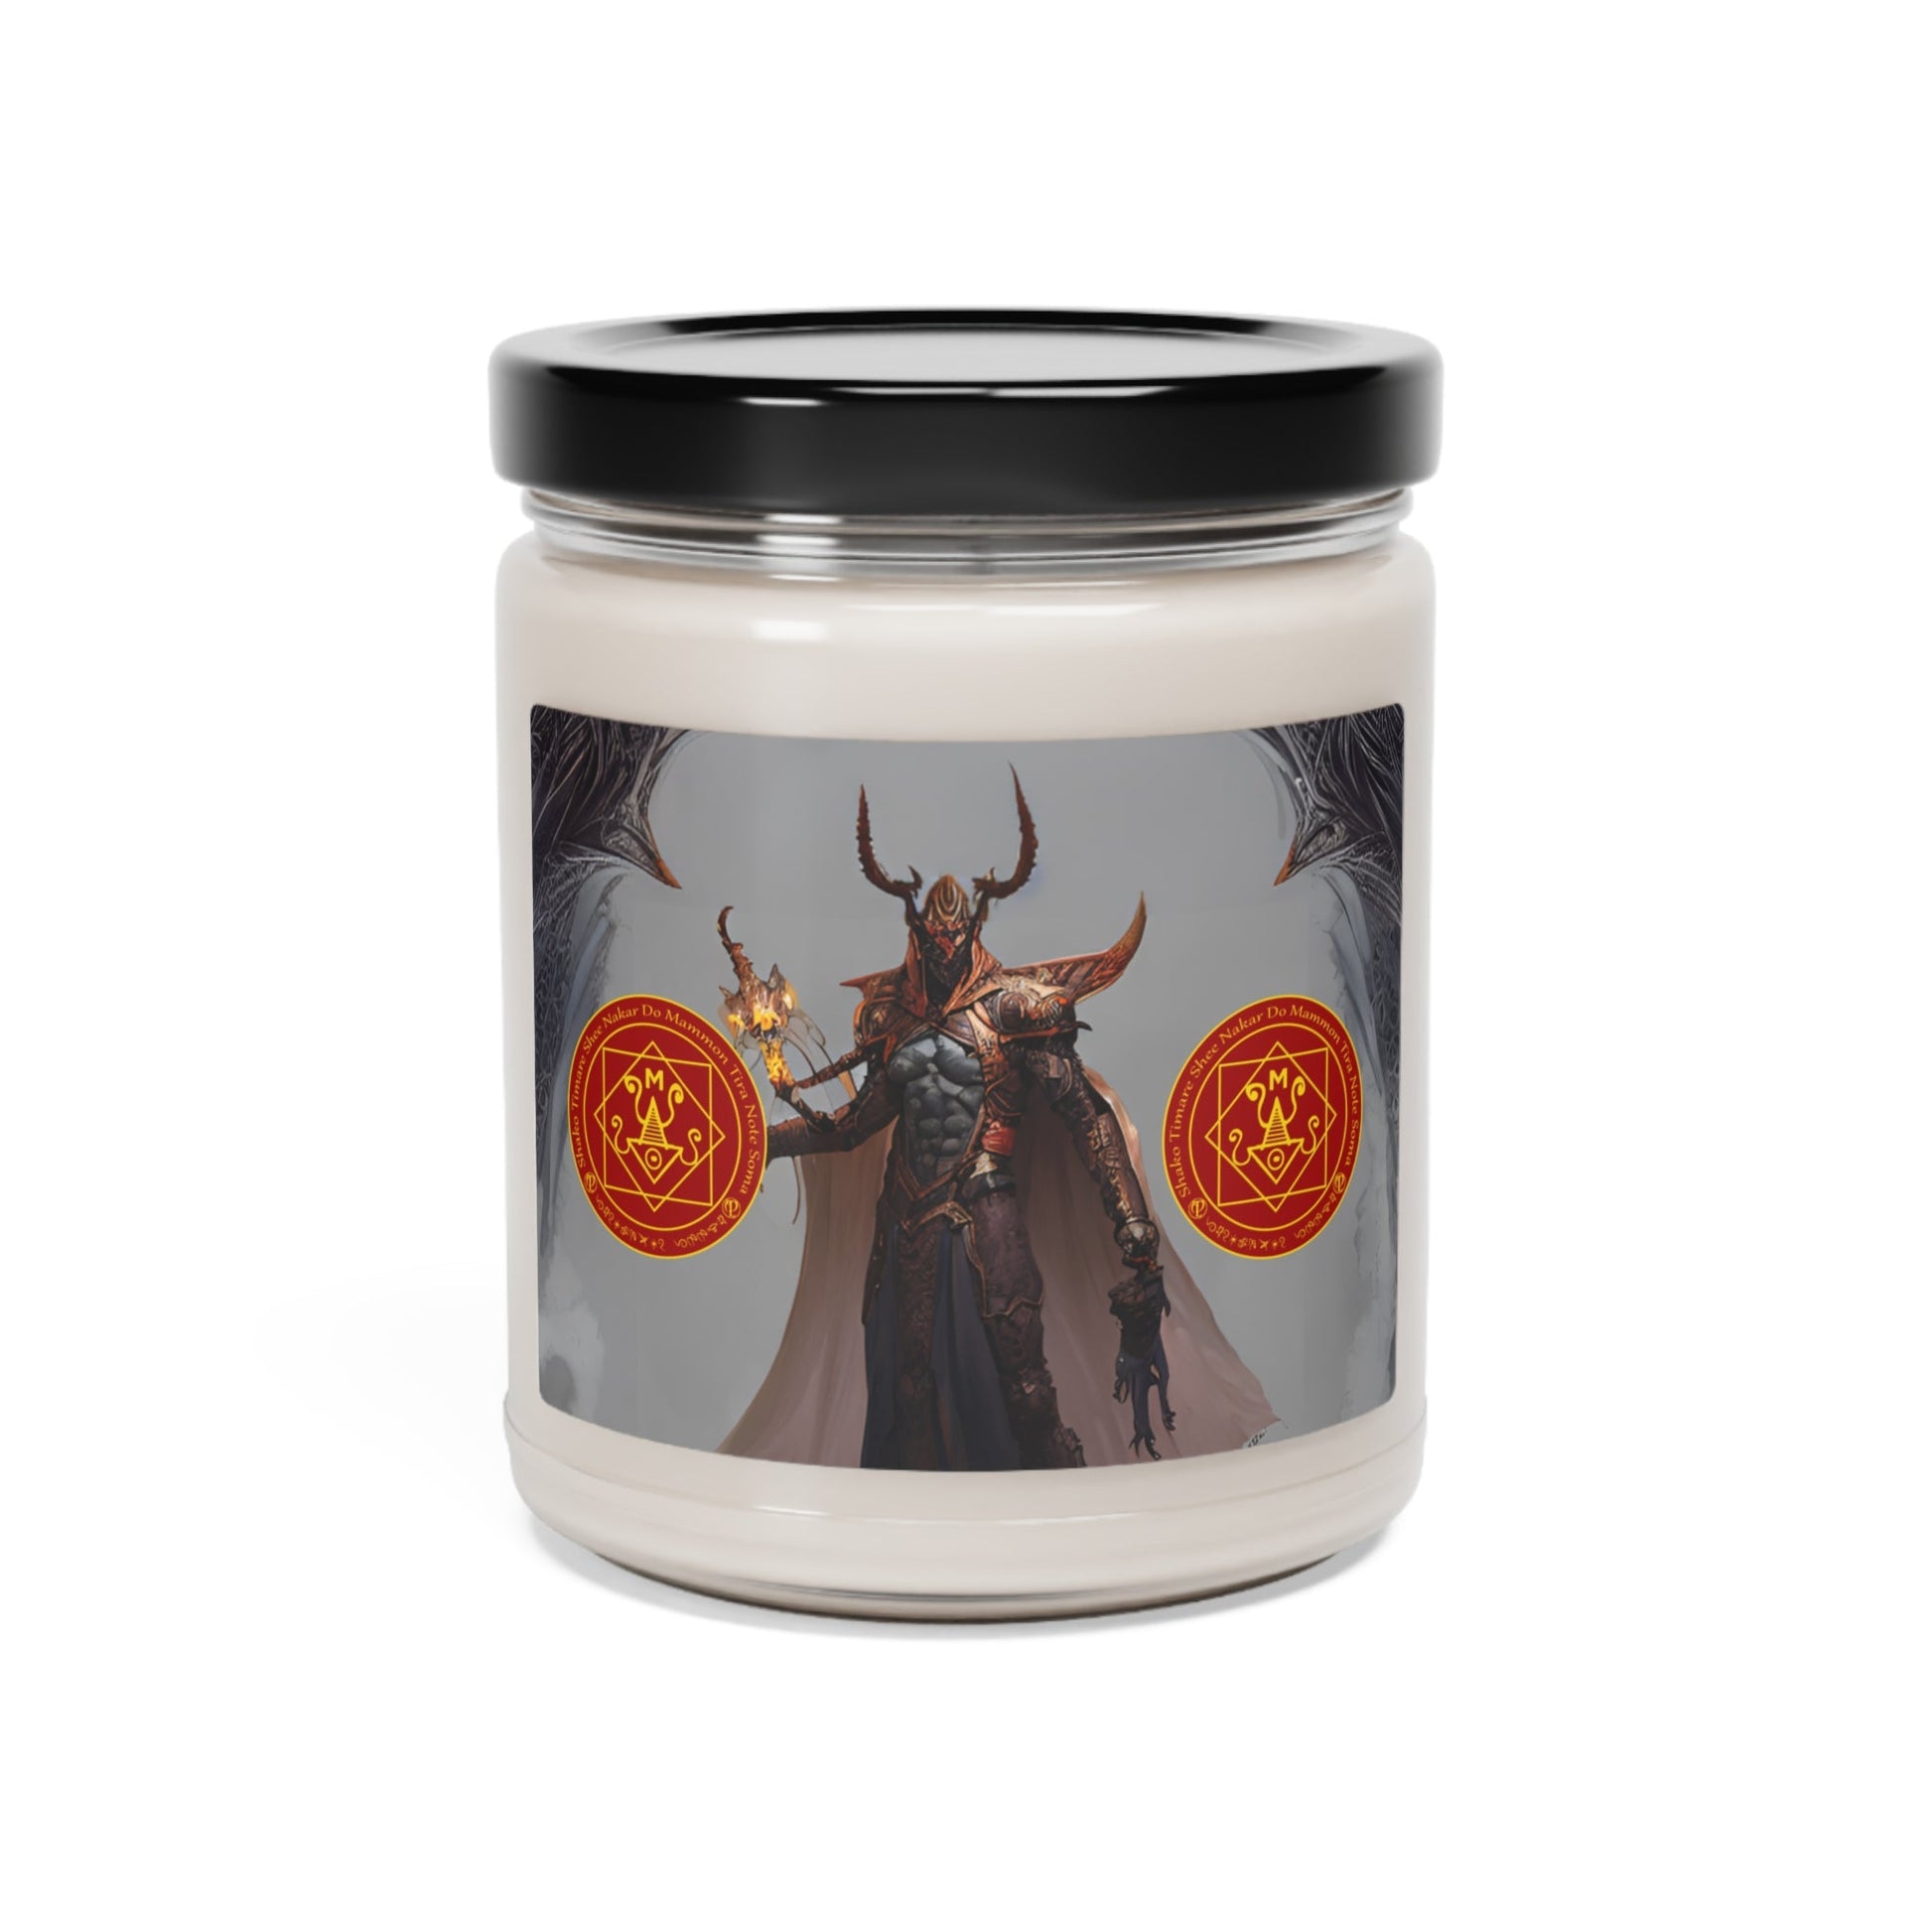 Demon-Mammon-Altar-Scented-Soy-Candle-for-Money-related-offerings-rituals-initiations-or-praying-and-meditation-11